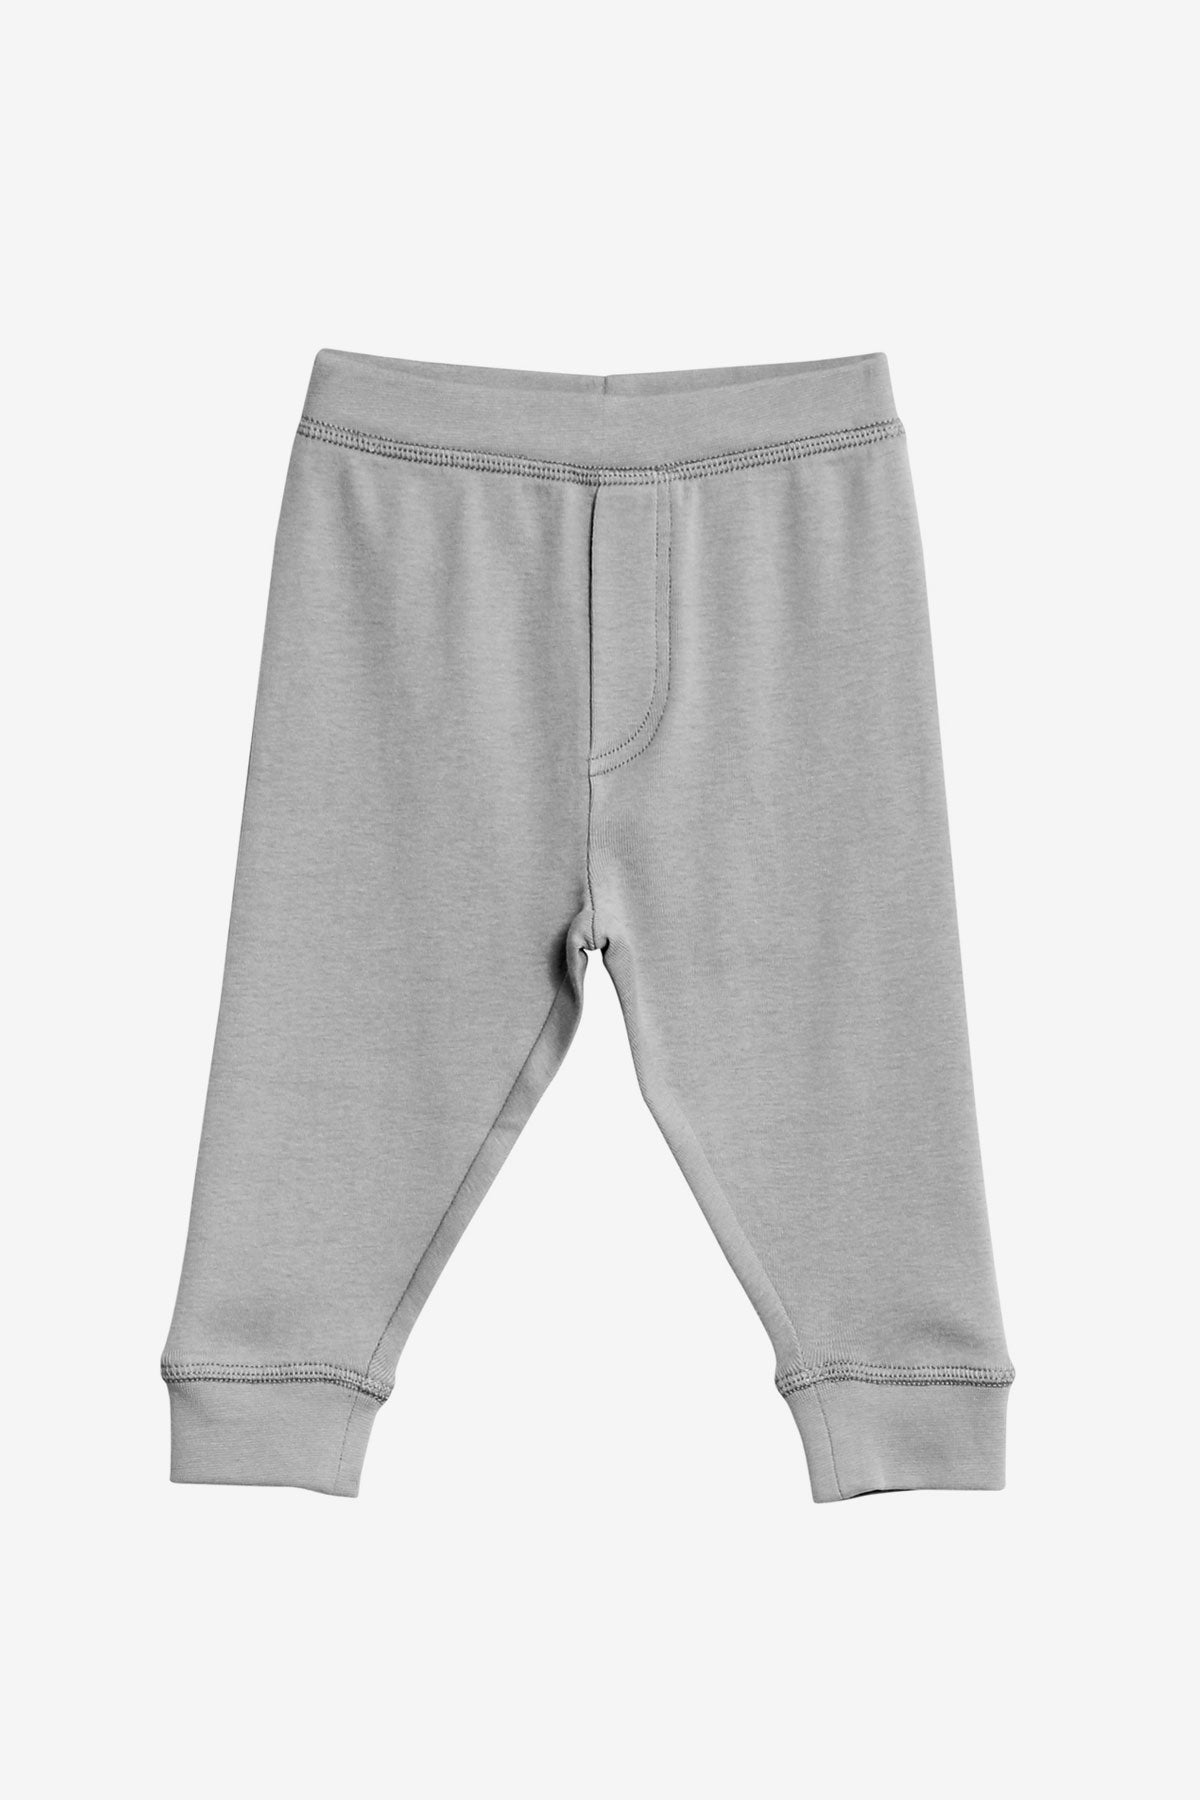 Wheat Grey Lounge Pants at Mini Ruby Contemporary Childrenswear